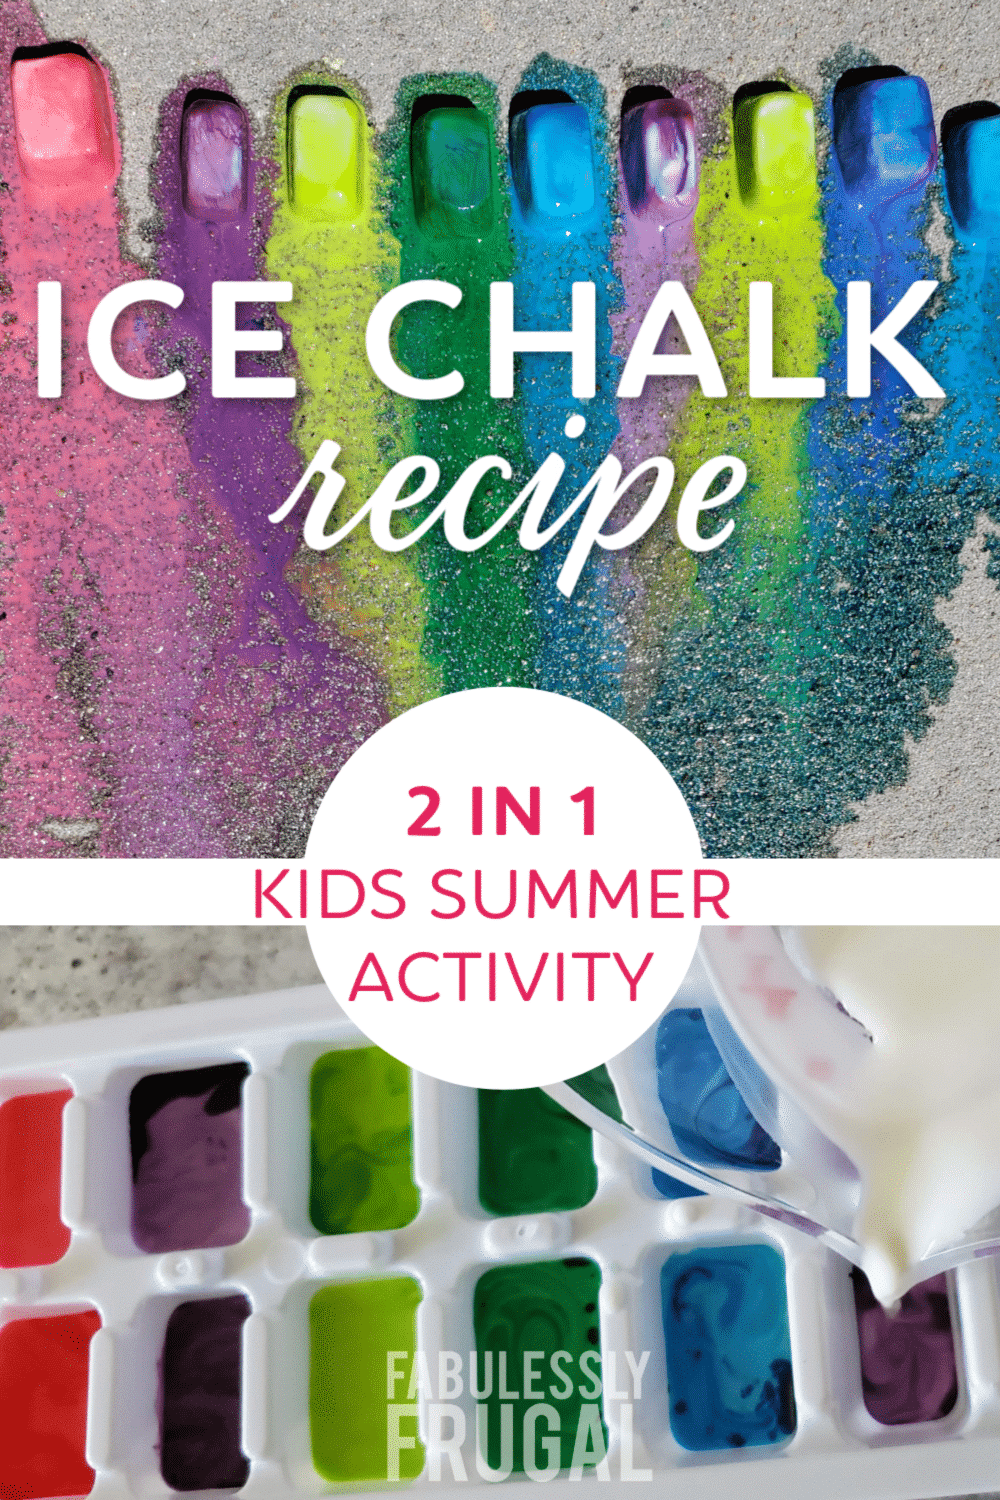 Summer ice chalk activity - two activities in one!